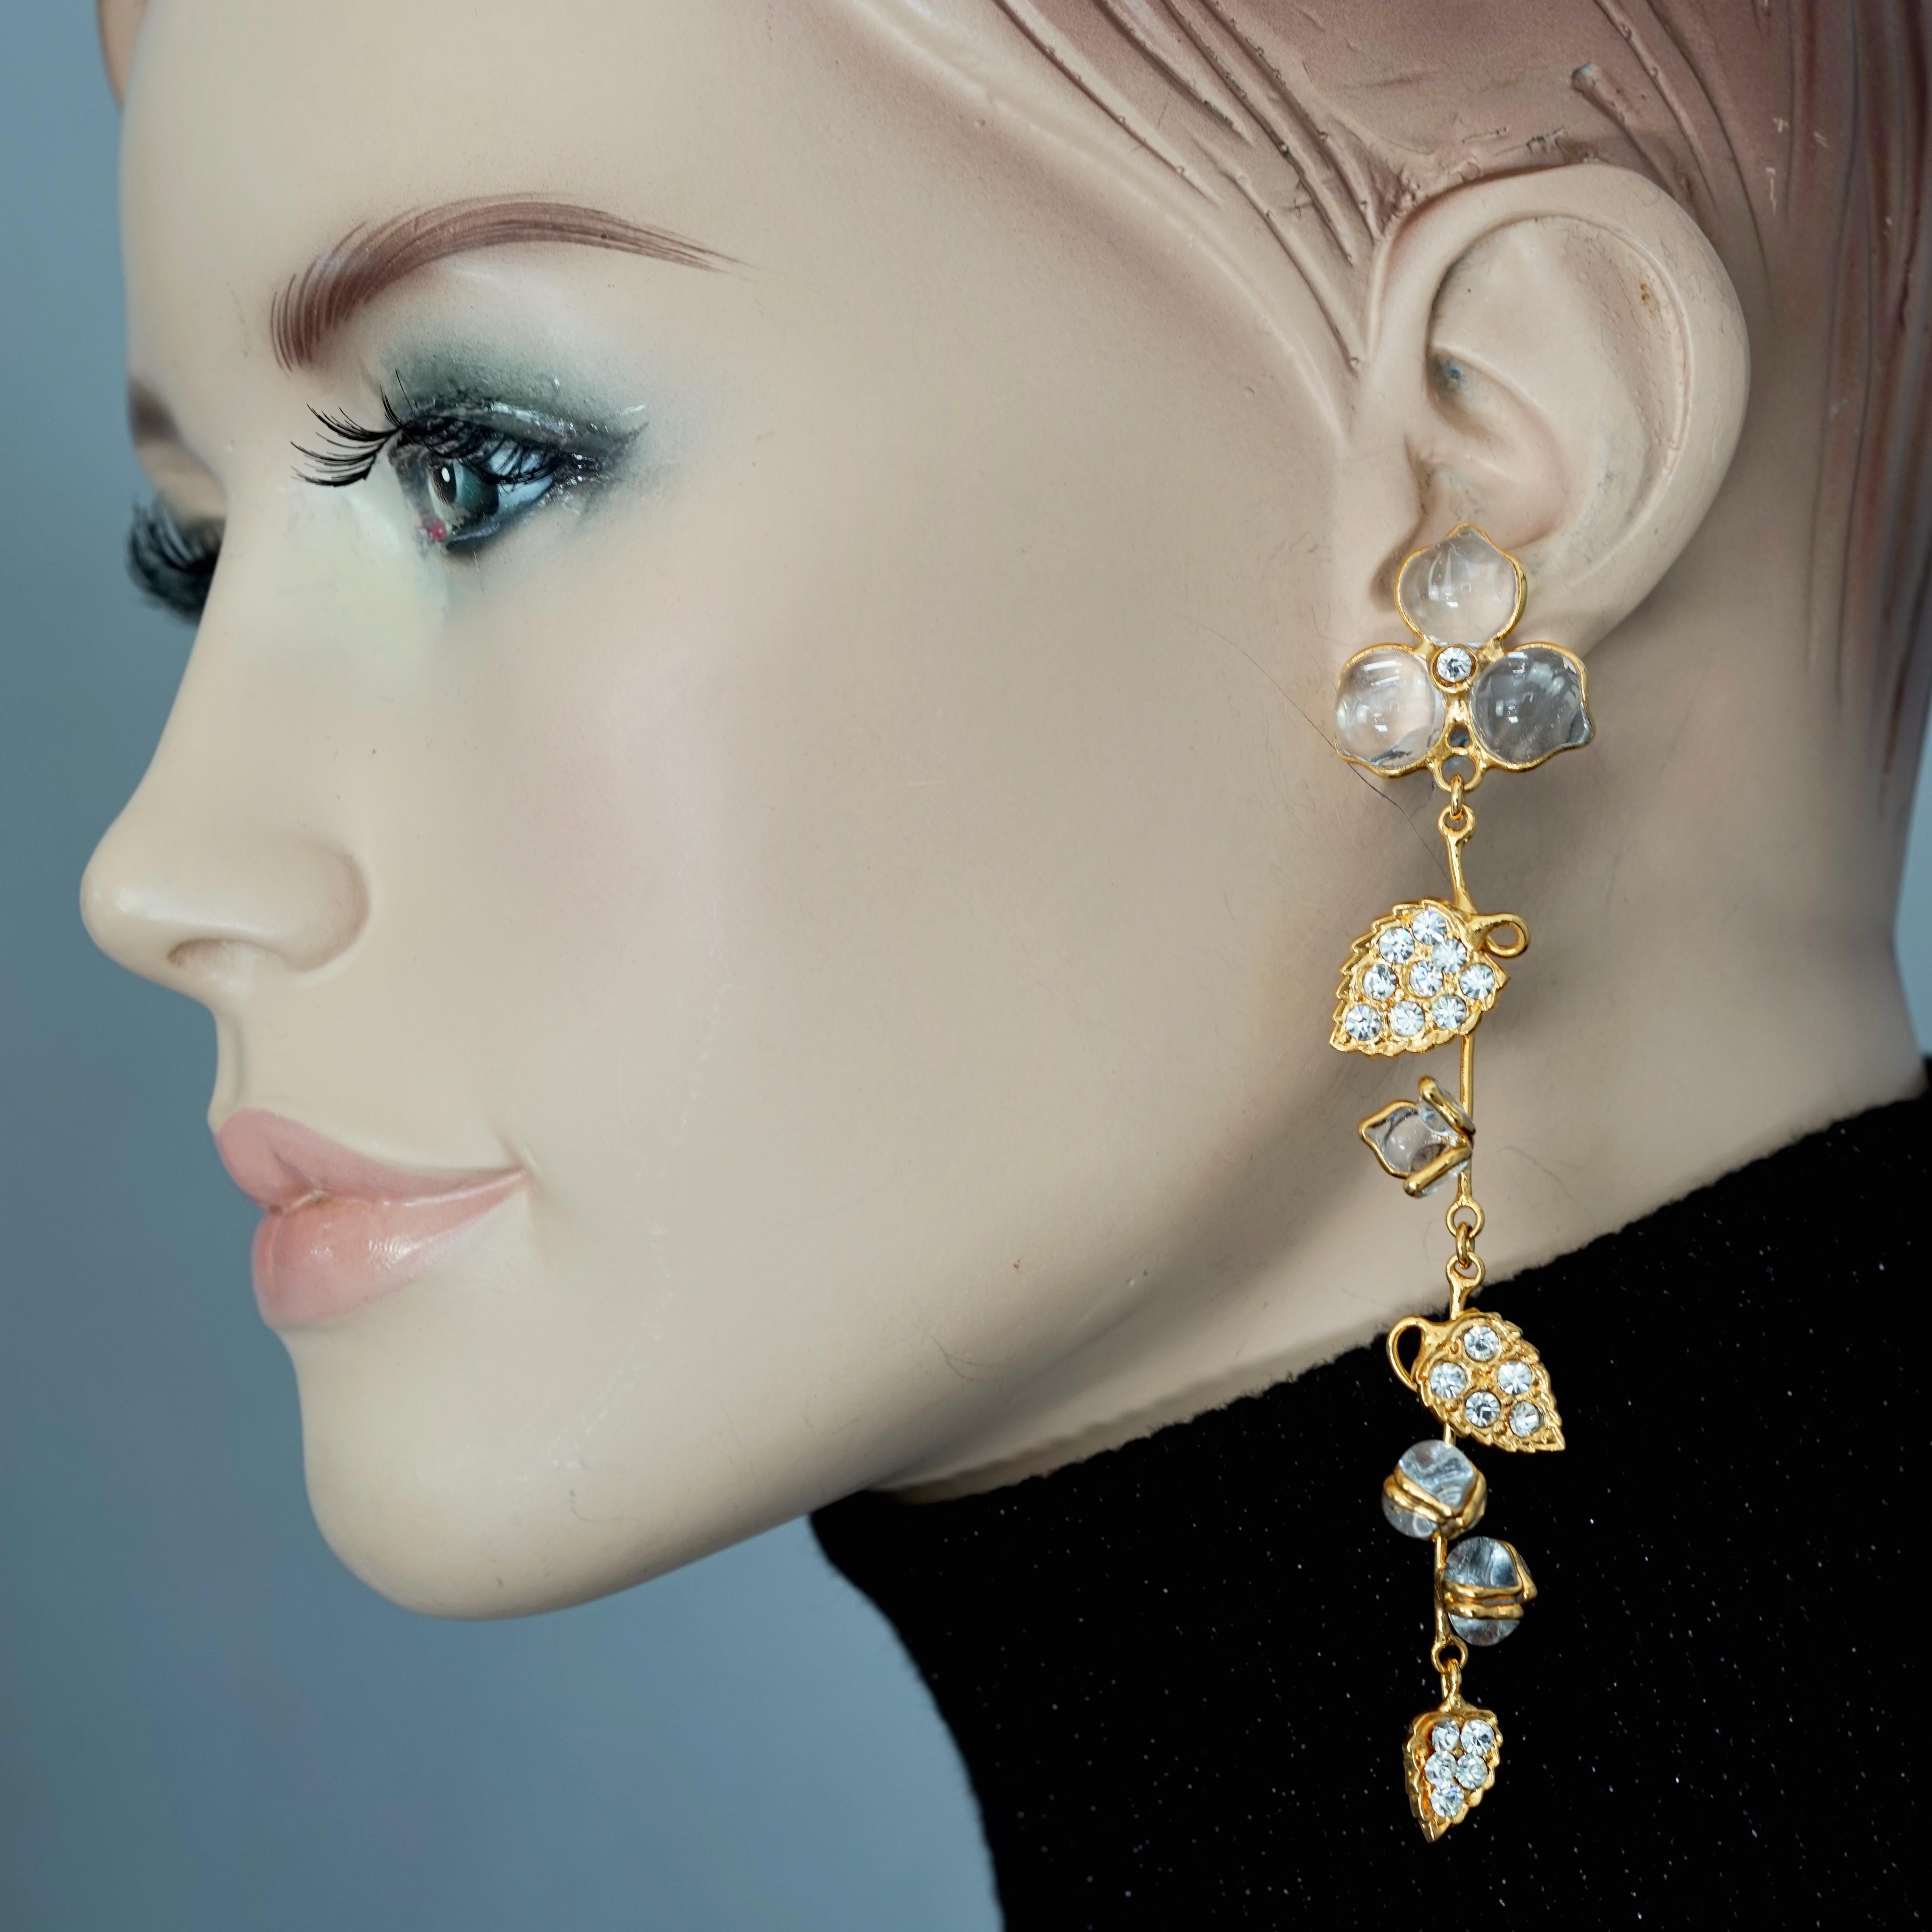 Vintage AUGUSTINE PARIS by Thierry GRIPOIX Flower Vine Dangling Earrings

Measurements:
Height: 4.33 inches (11 cm)
Width: 0.86 inch (2.2 cm)
Weight: 11 grams

Features:.
- 100% Authentic AUGUSTINE PARIS by Thierry GRIPOIX.
- Translucent Gripoix/